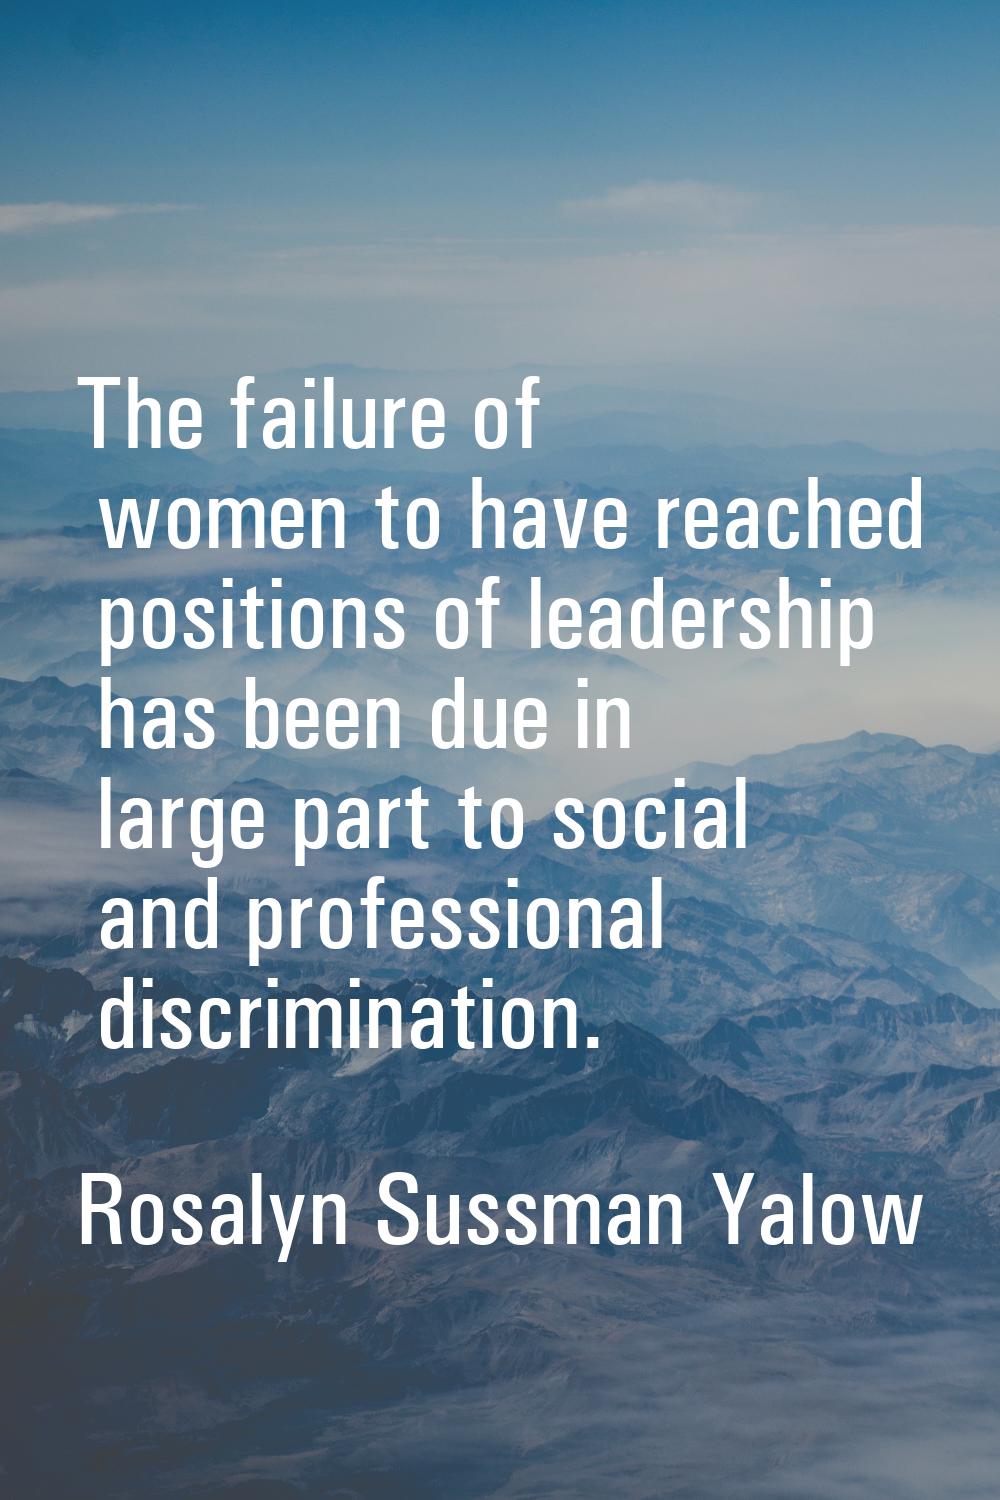 The failure of women to have reached positions of leadership has been due in large part to social a